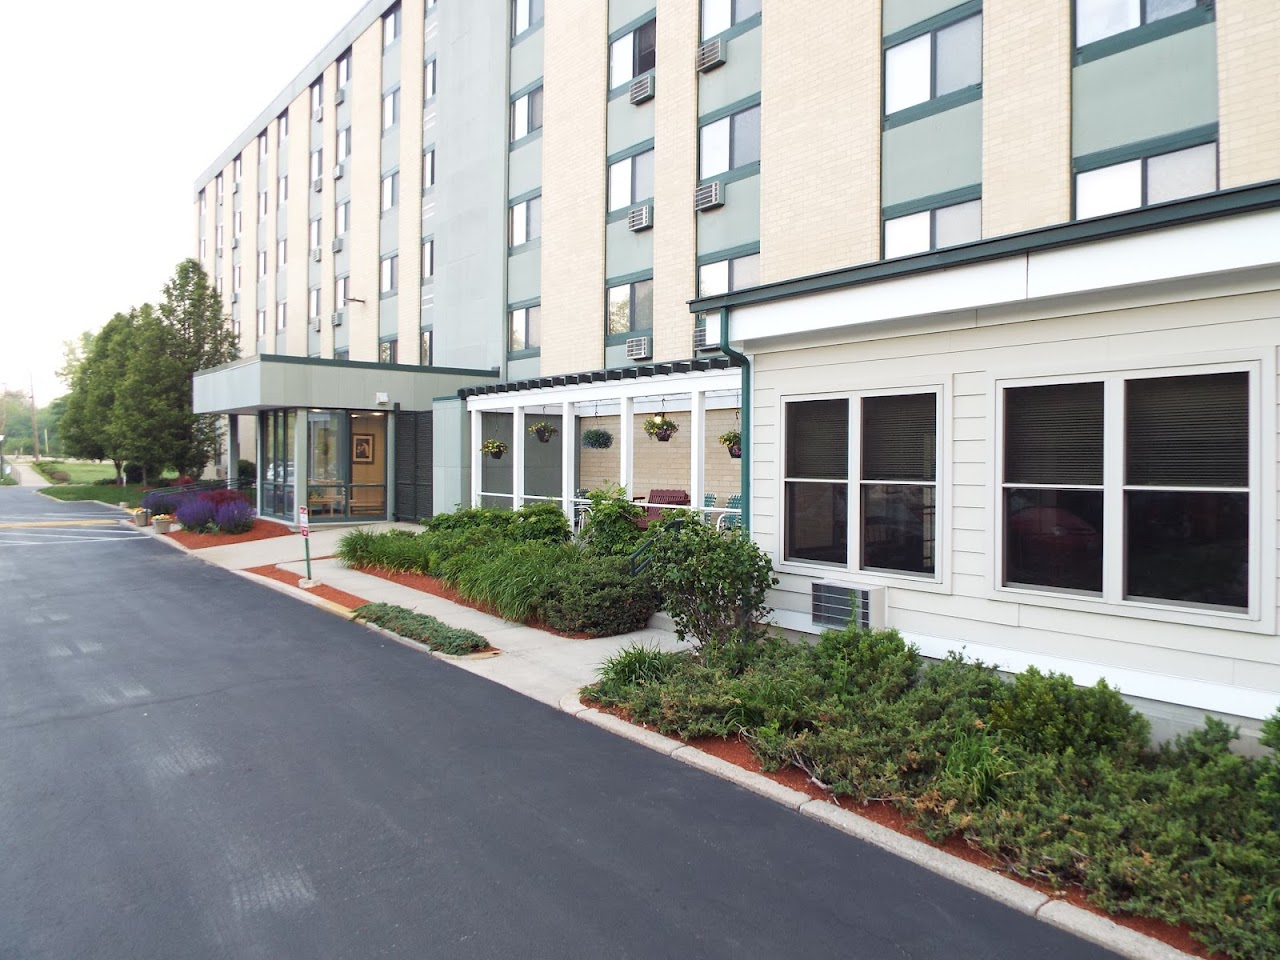 Photo of RIVERSIDE VILLAGE. Affordable housing located at 1 FLAT ST CUMBERLAND, RI 02864